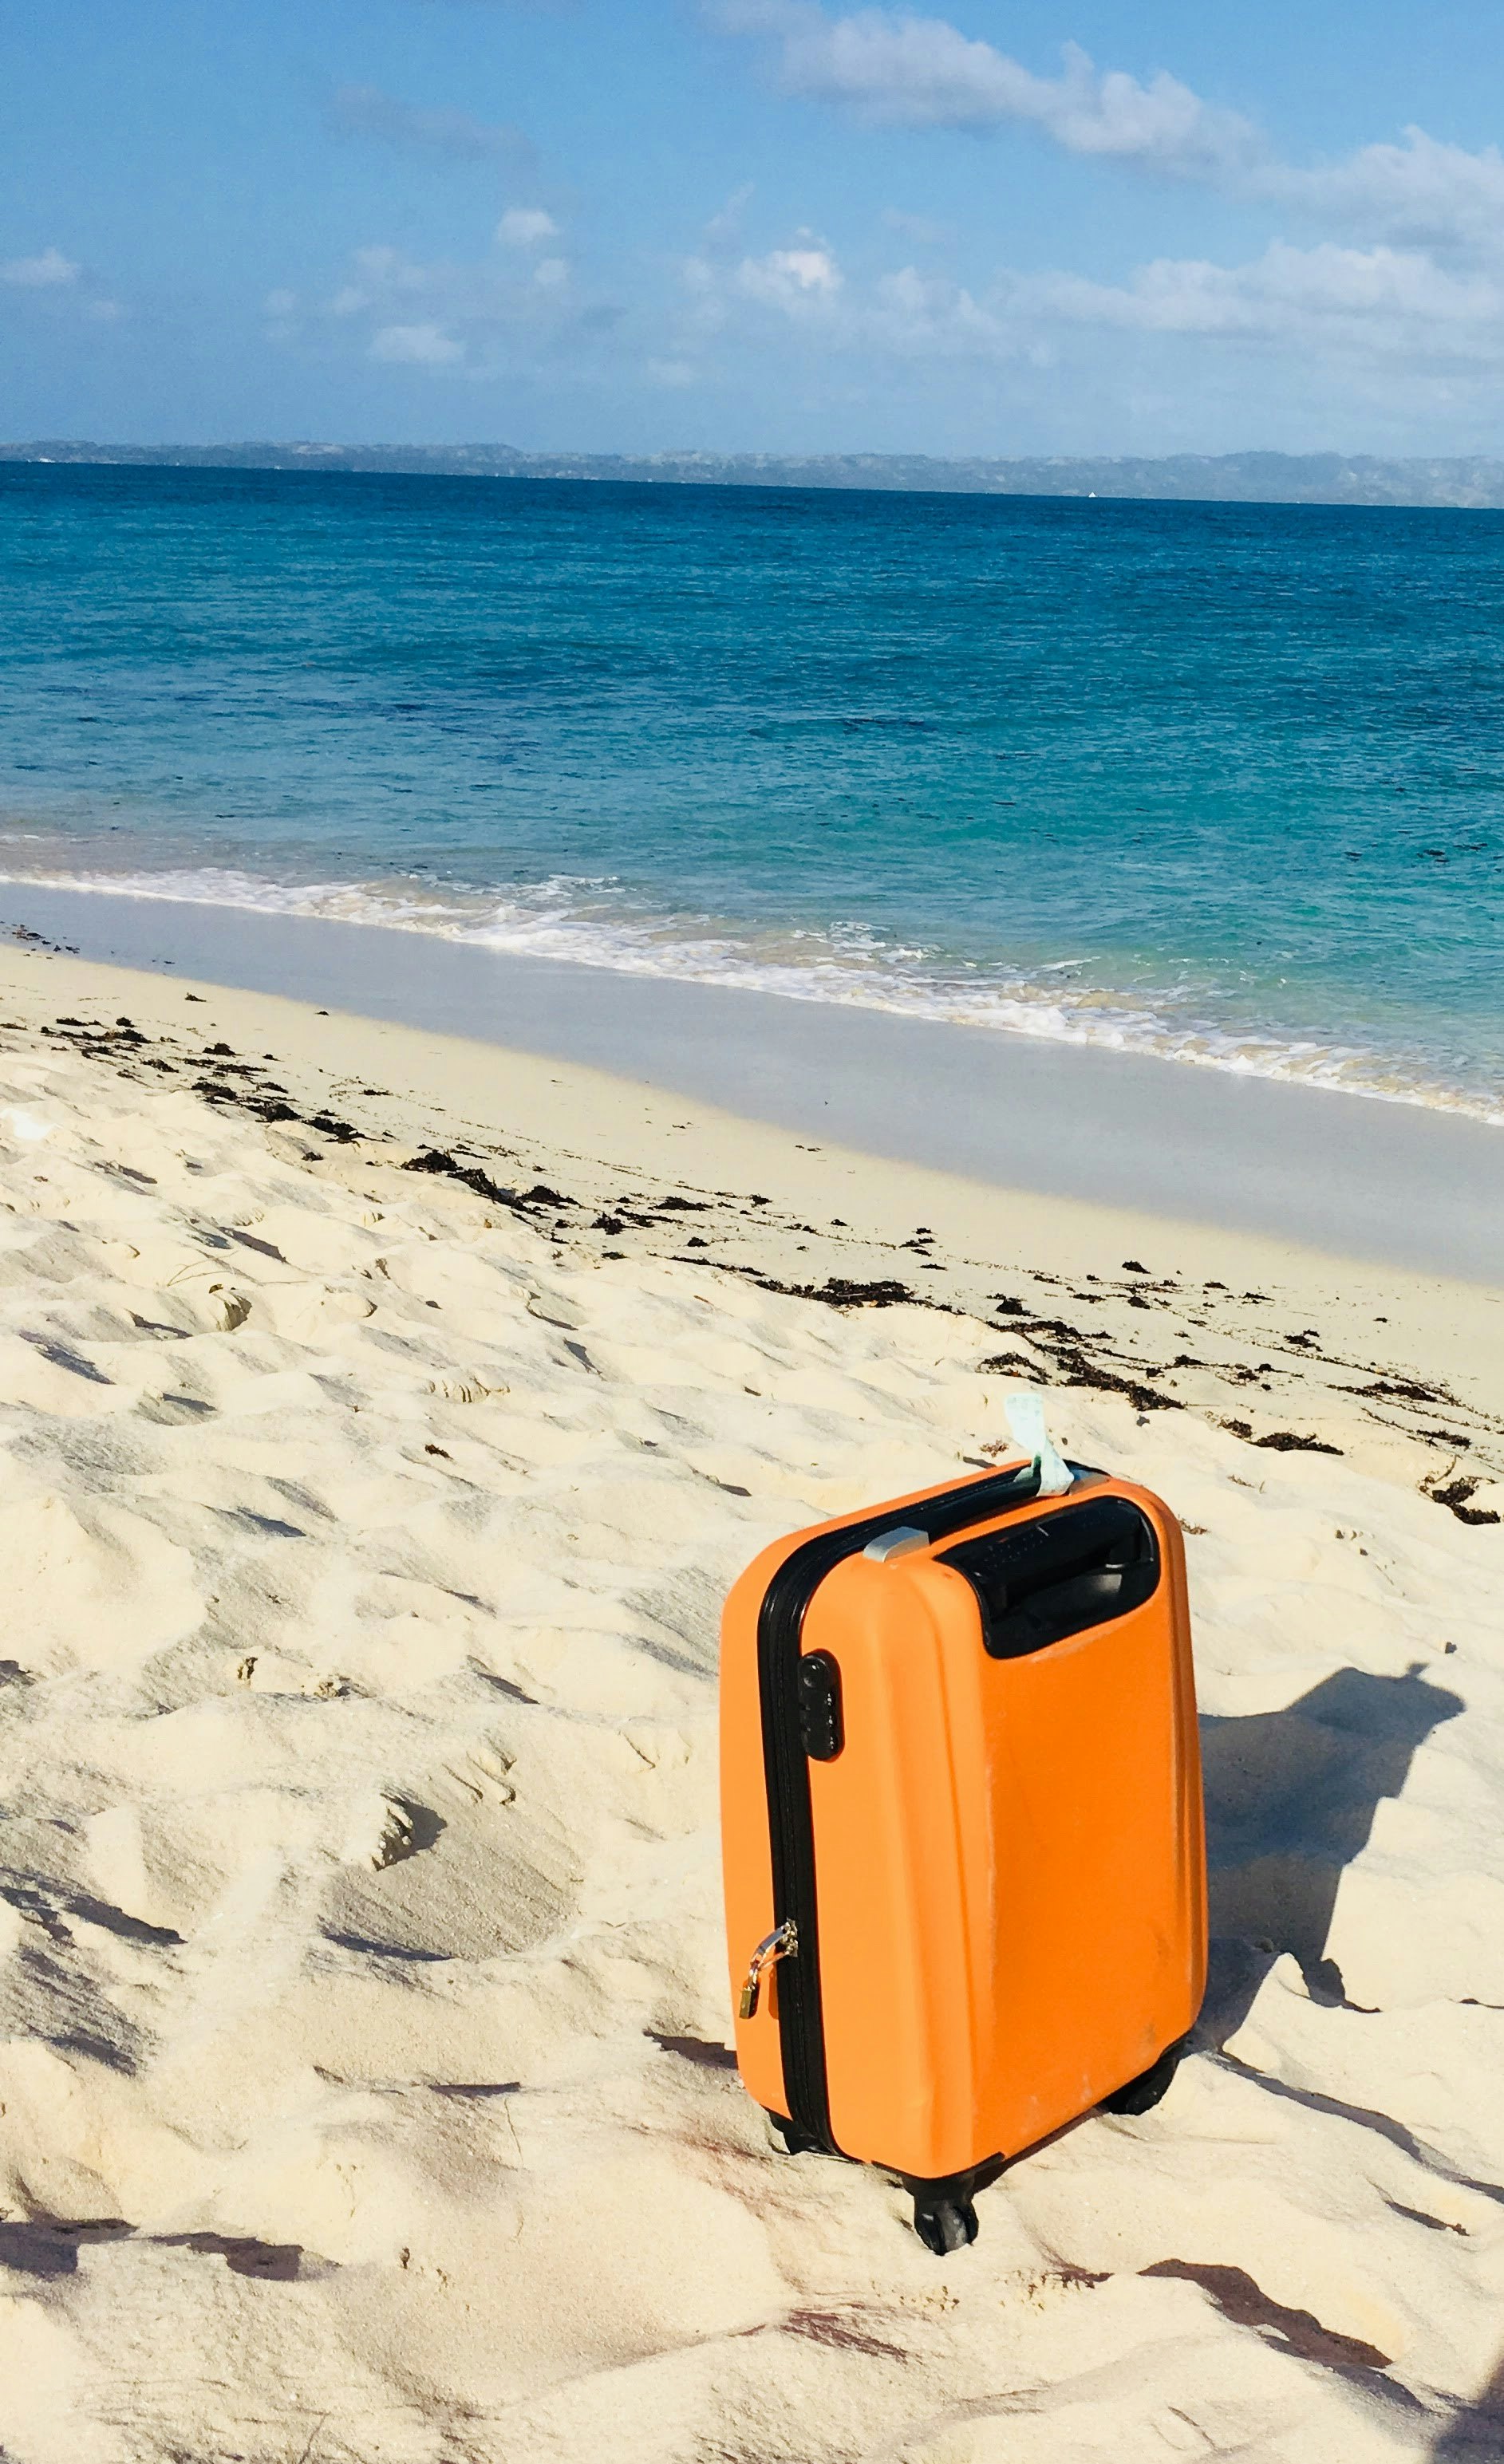 This was my lovely orange carry-on. I loved the color contrast on the beach on the island of Ile a Vache, Haiti.